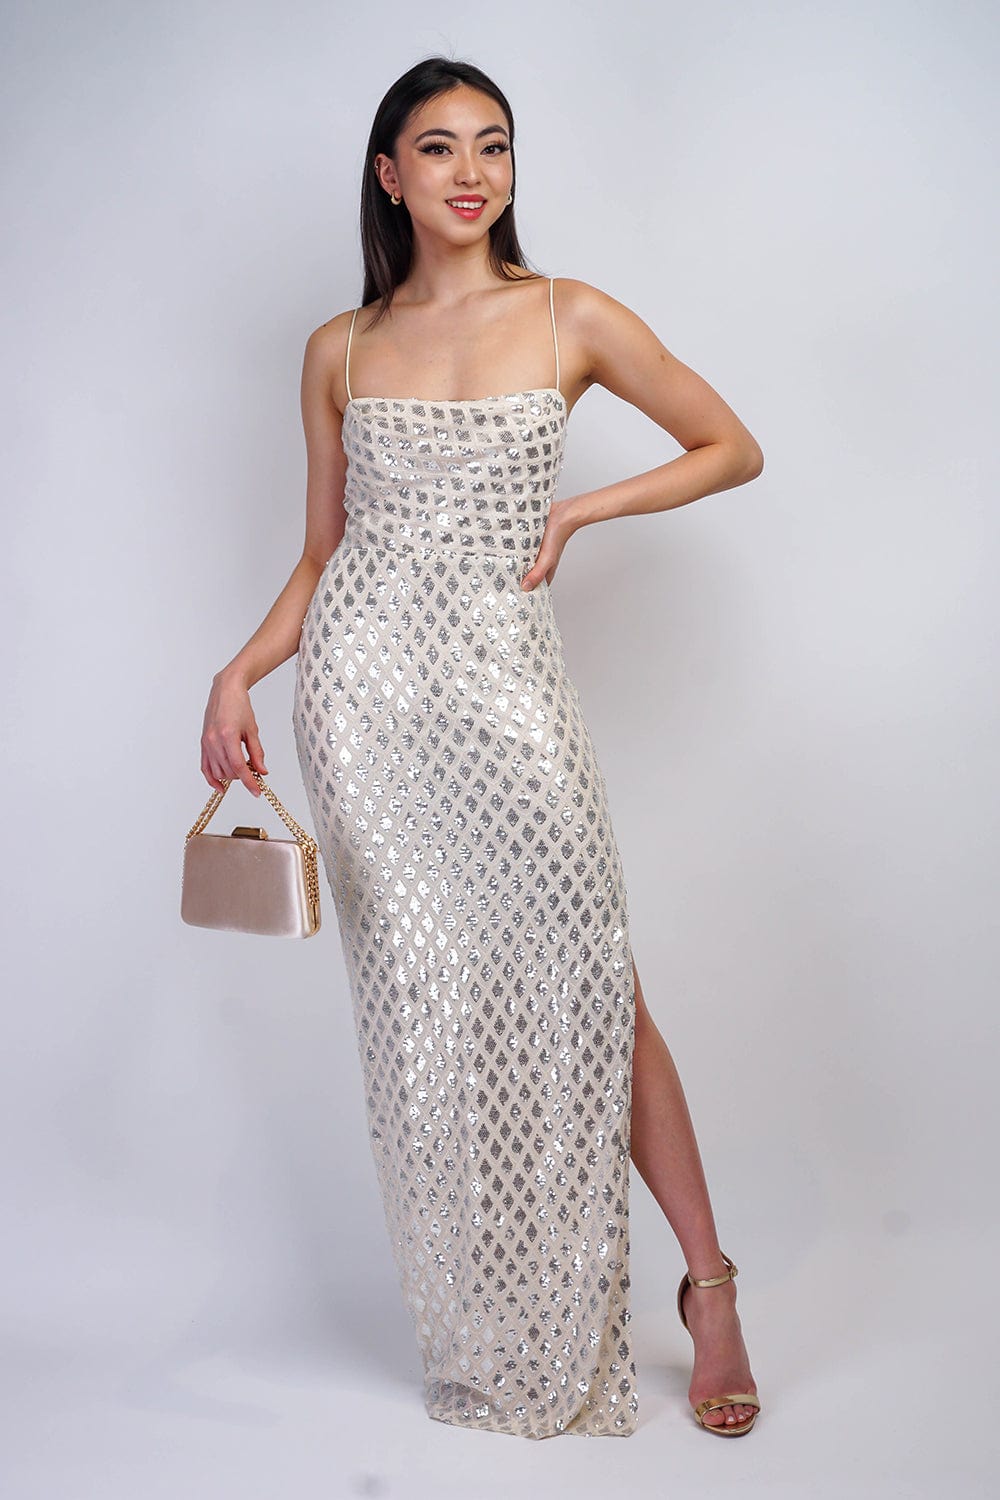 DCD GOWNS Ivory/Silver Stretch Sequin Gown